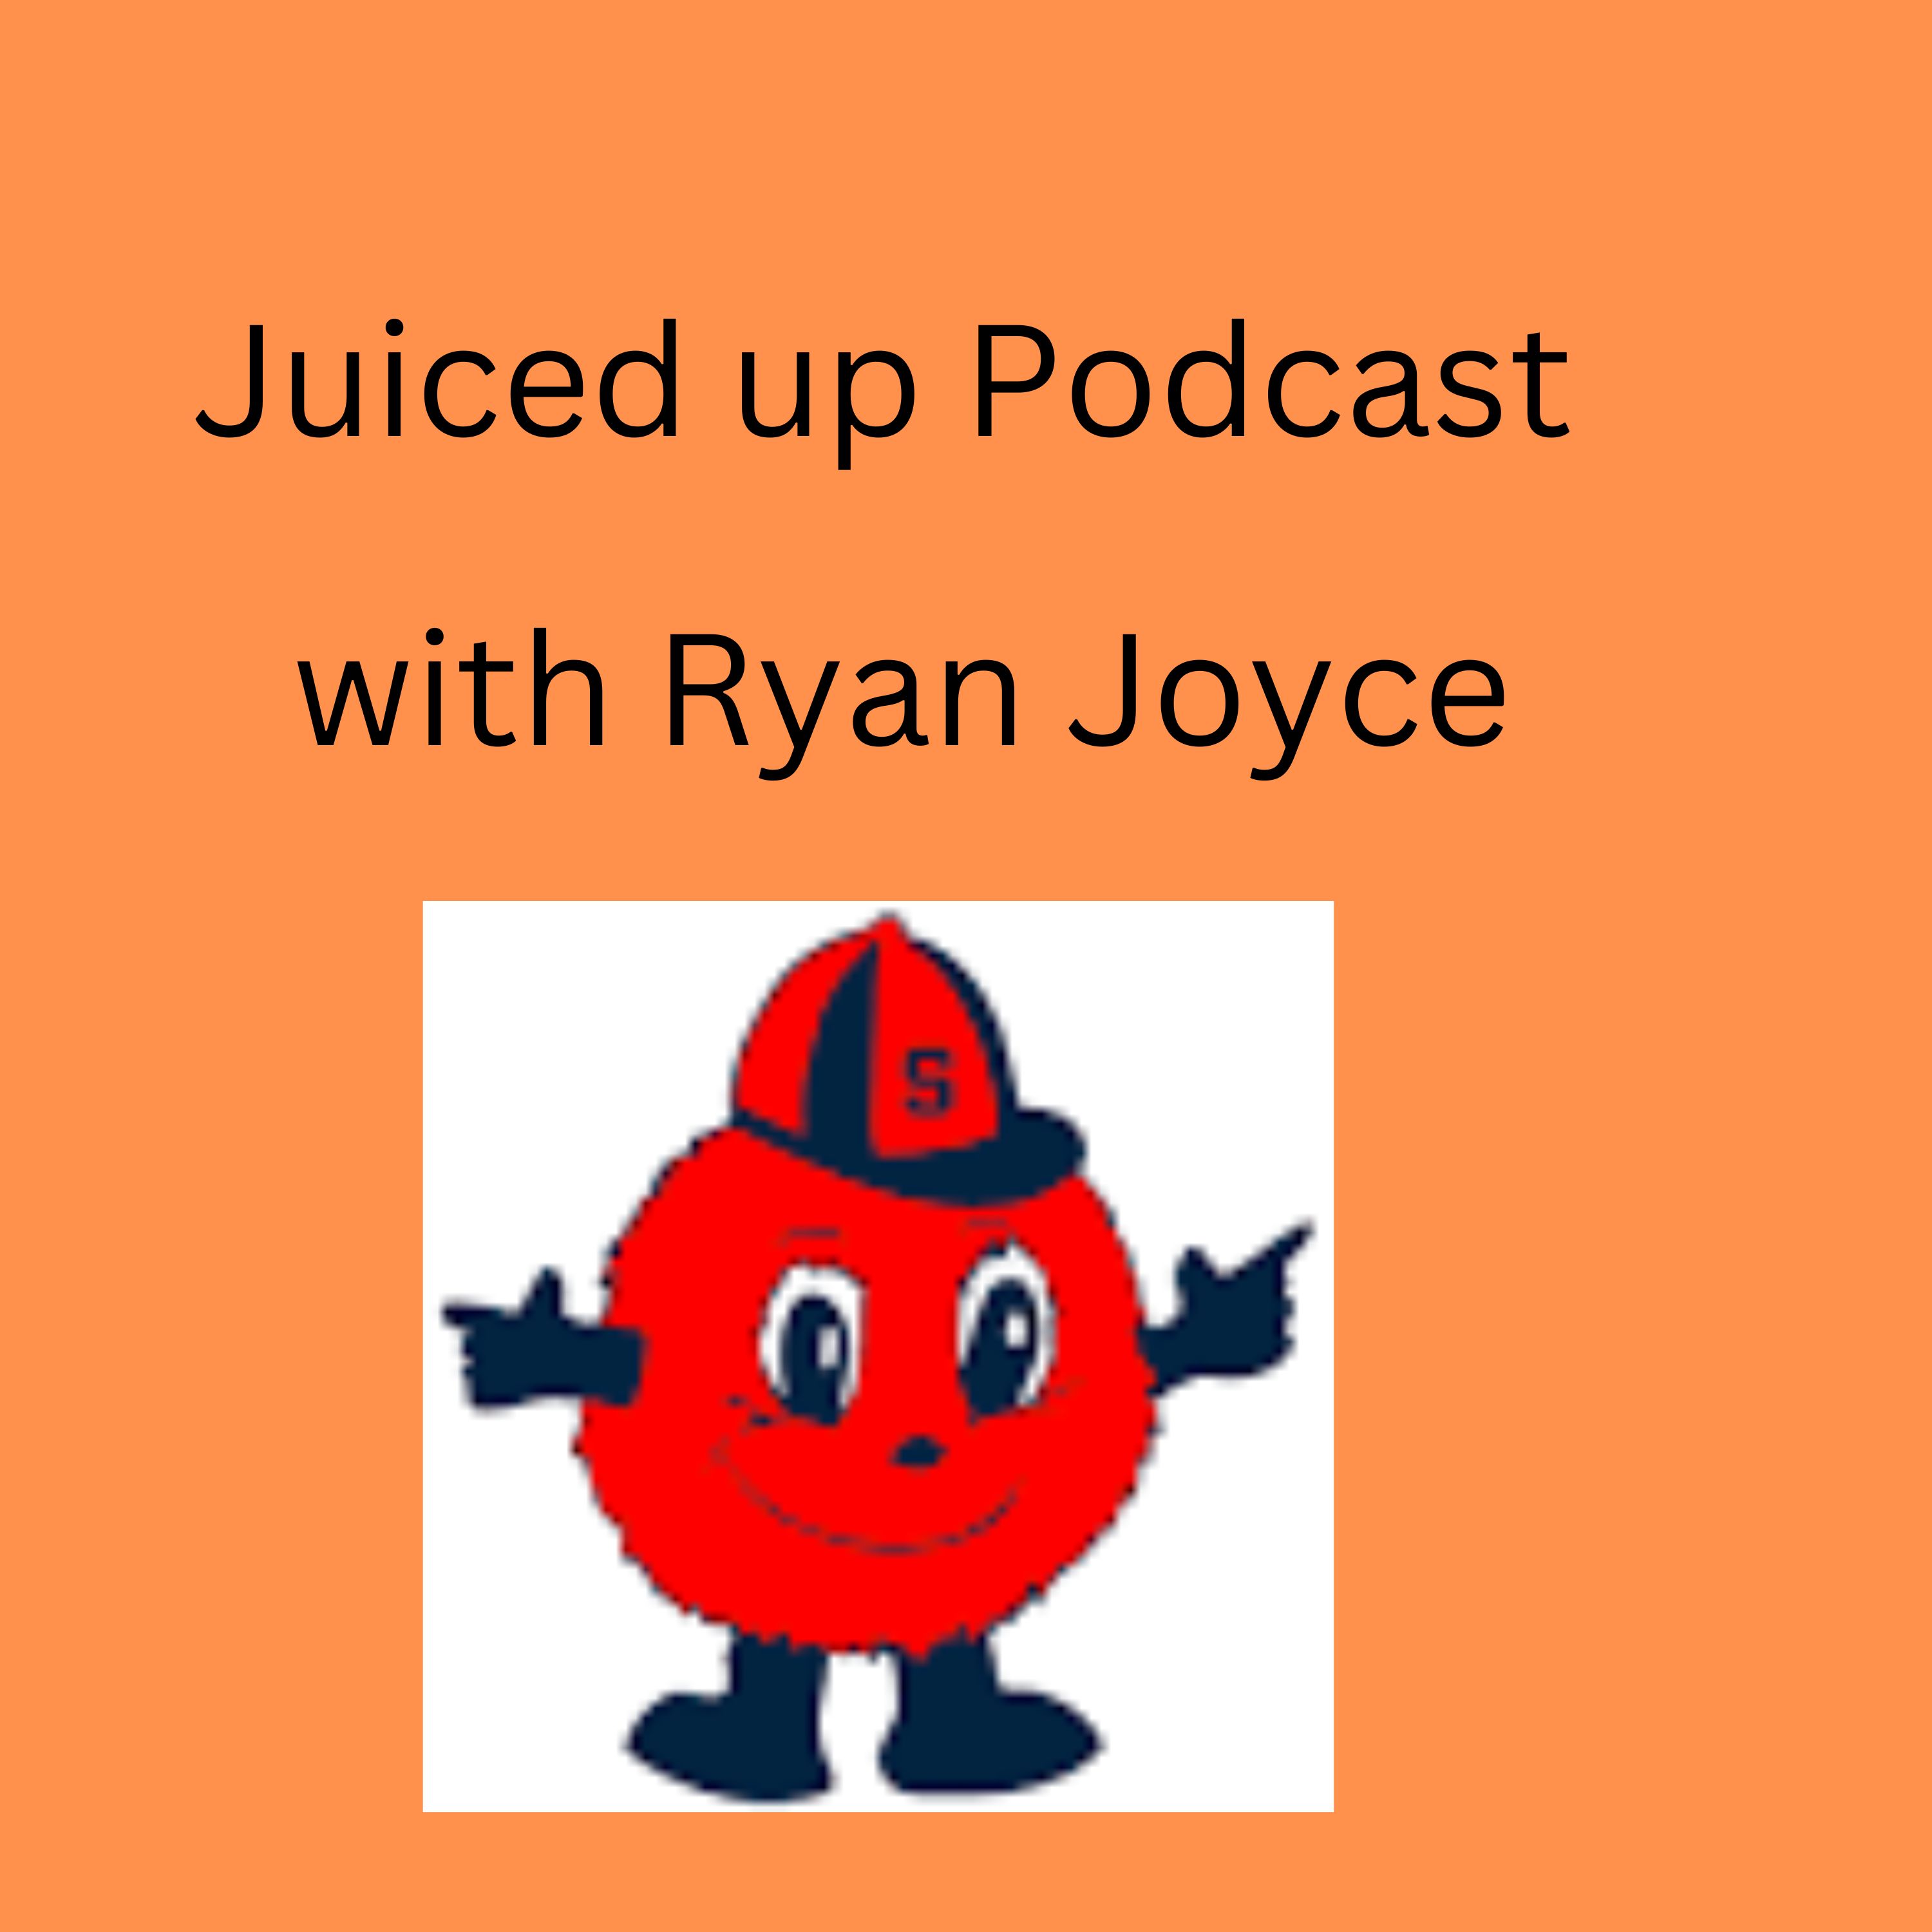 Juiced up podcast